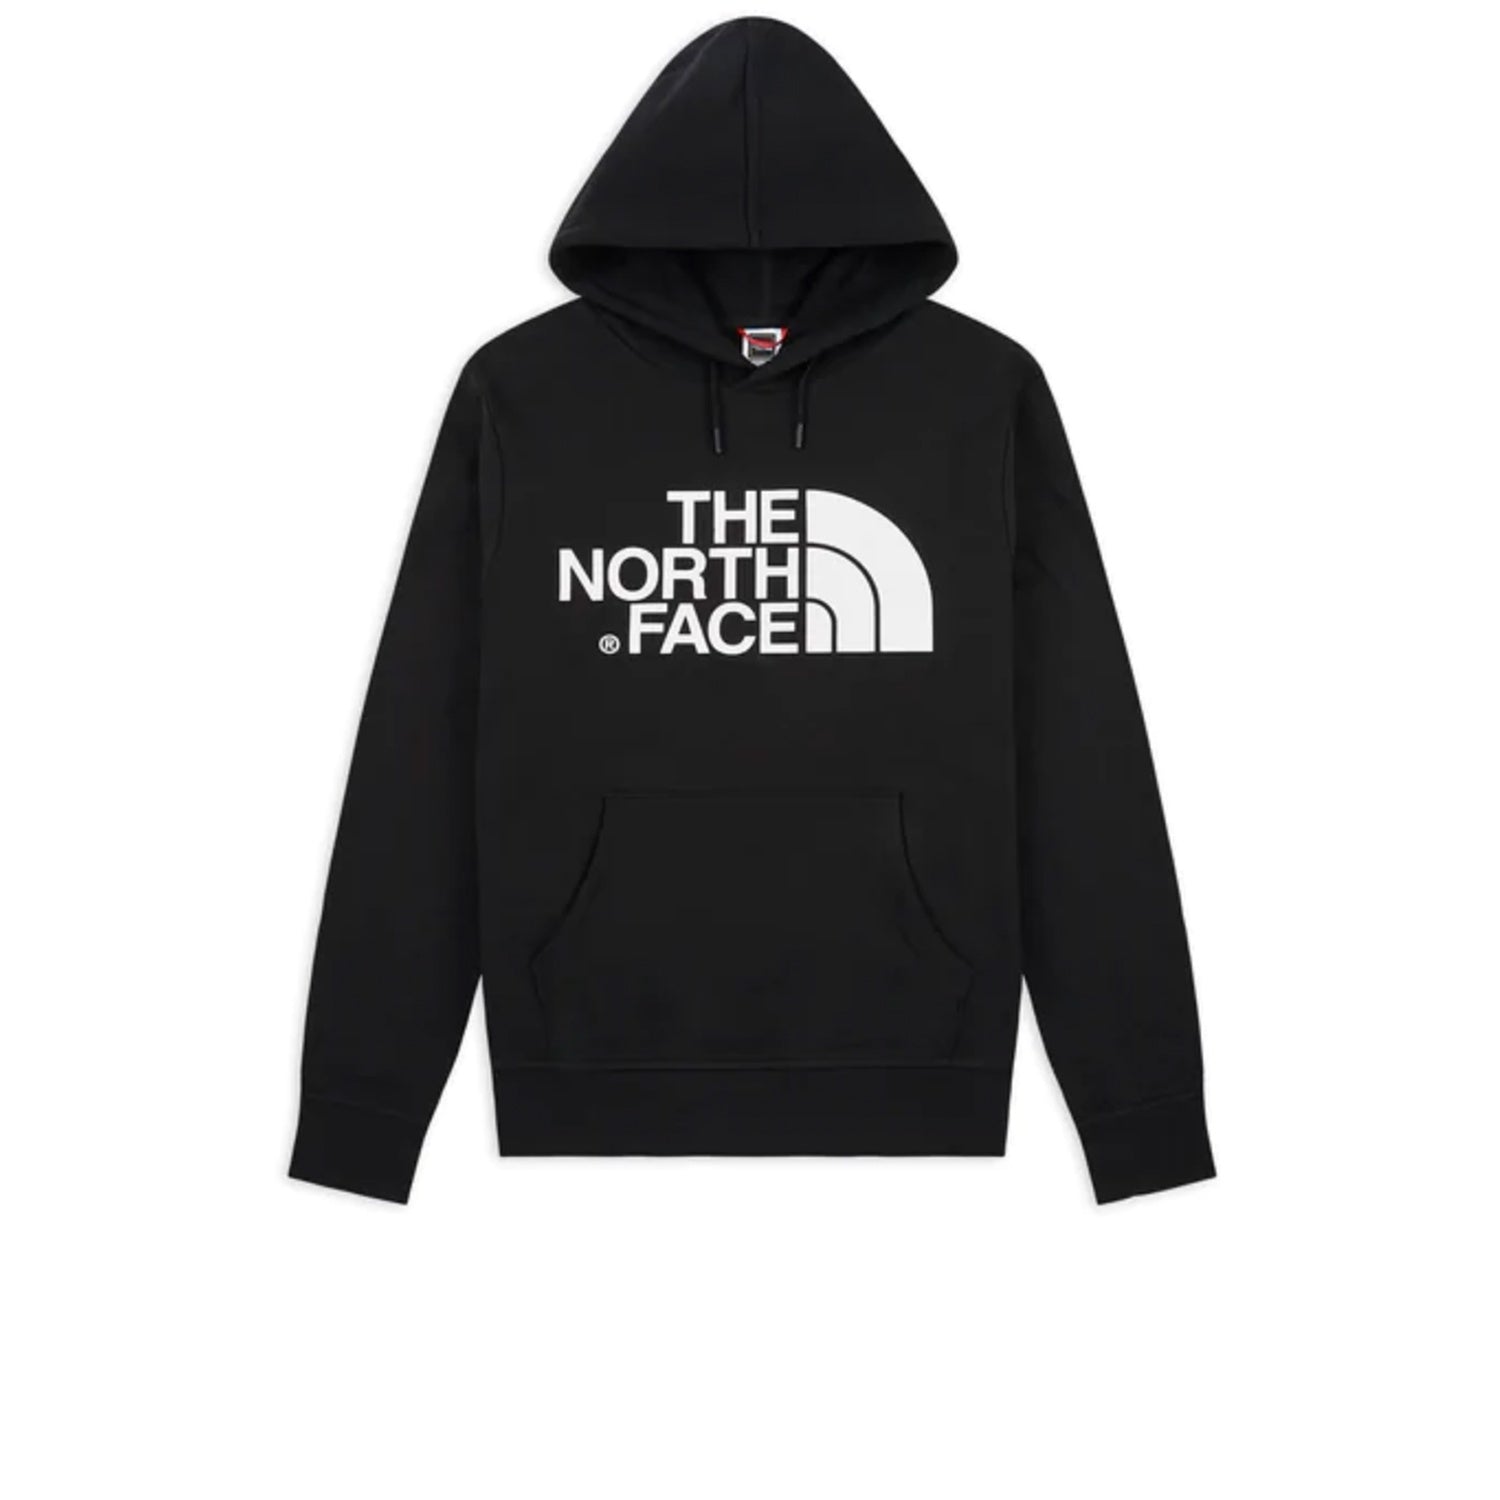 The North Face Standard Hoodie Black